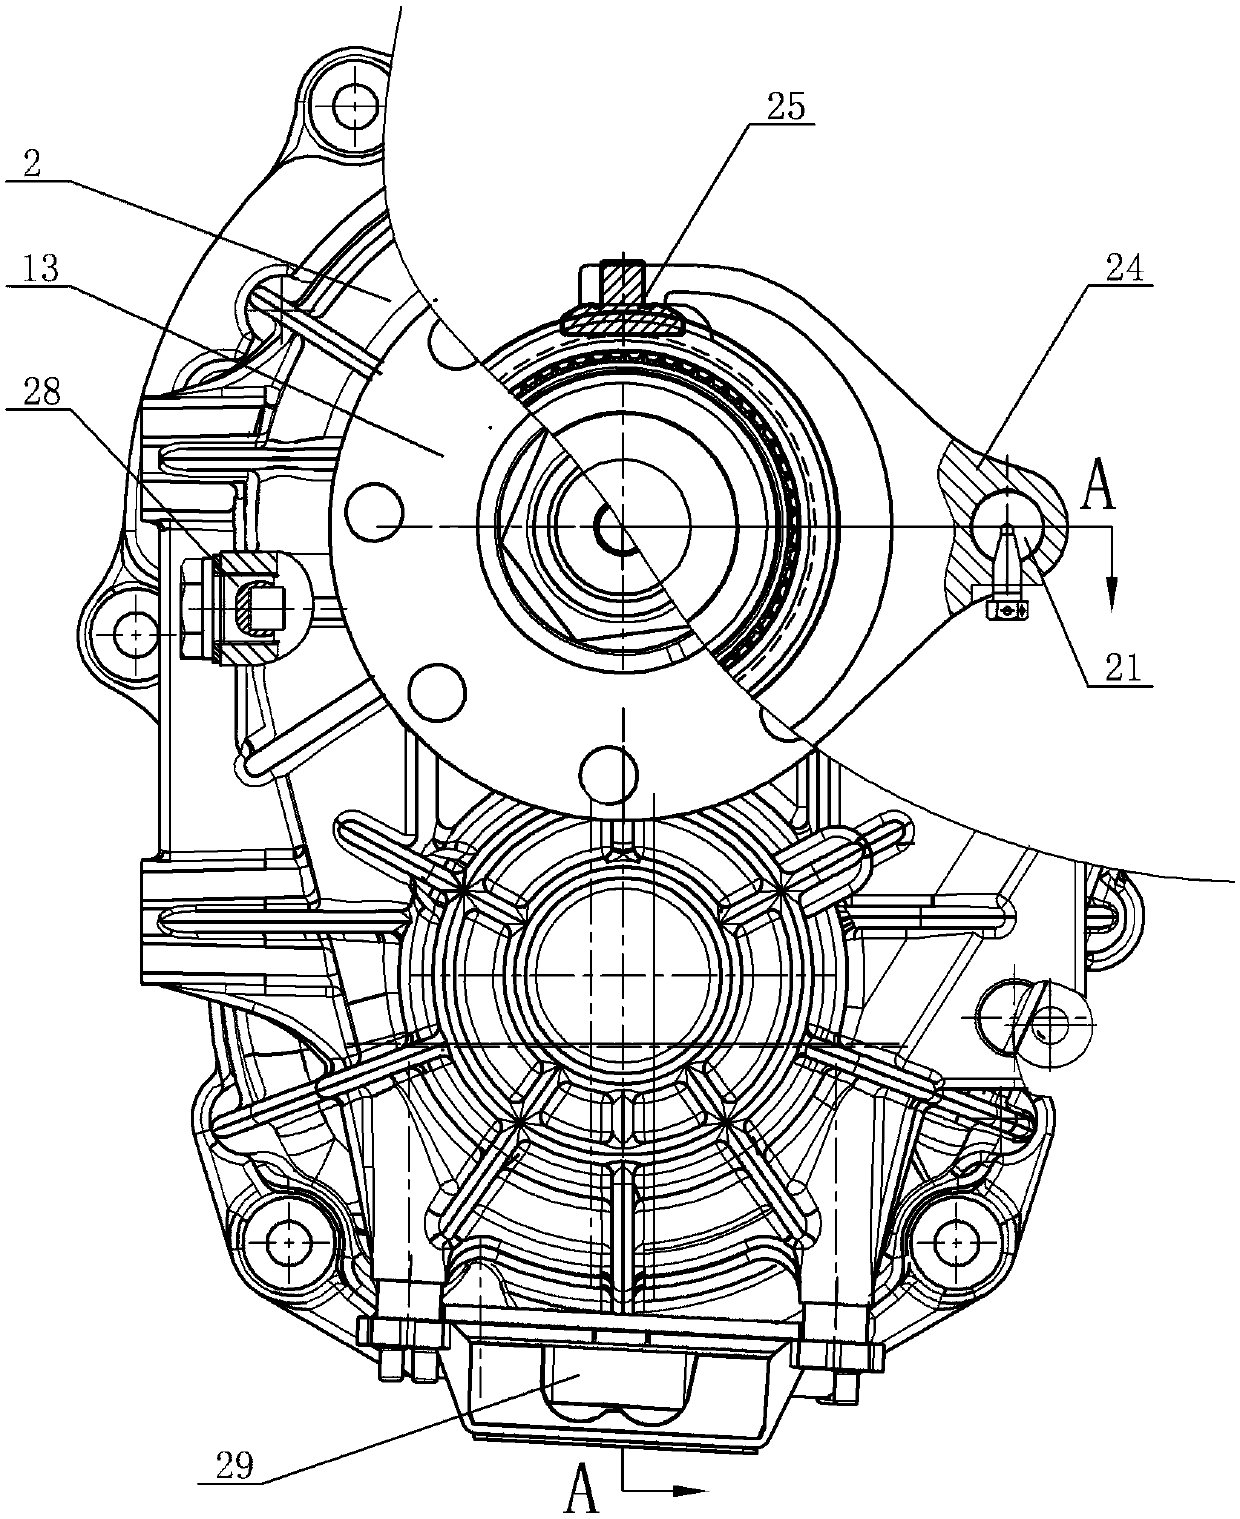 Two-gear mechanical vehicle transmission